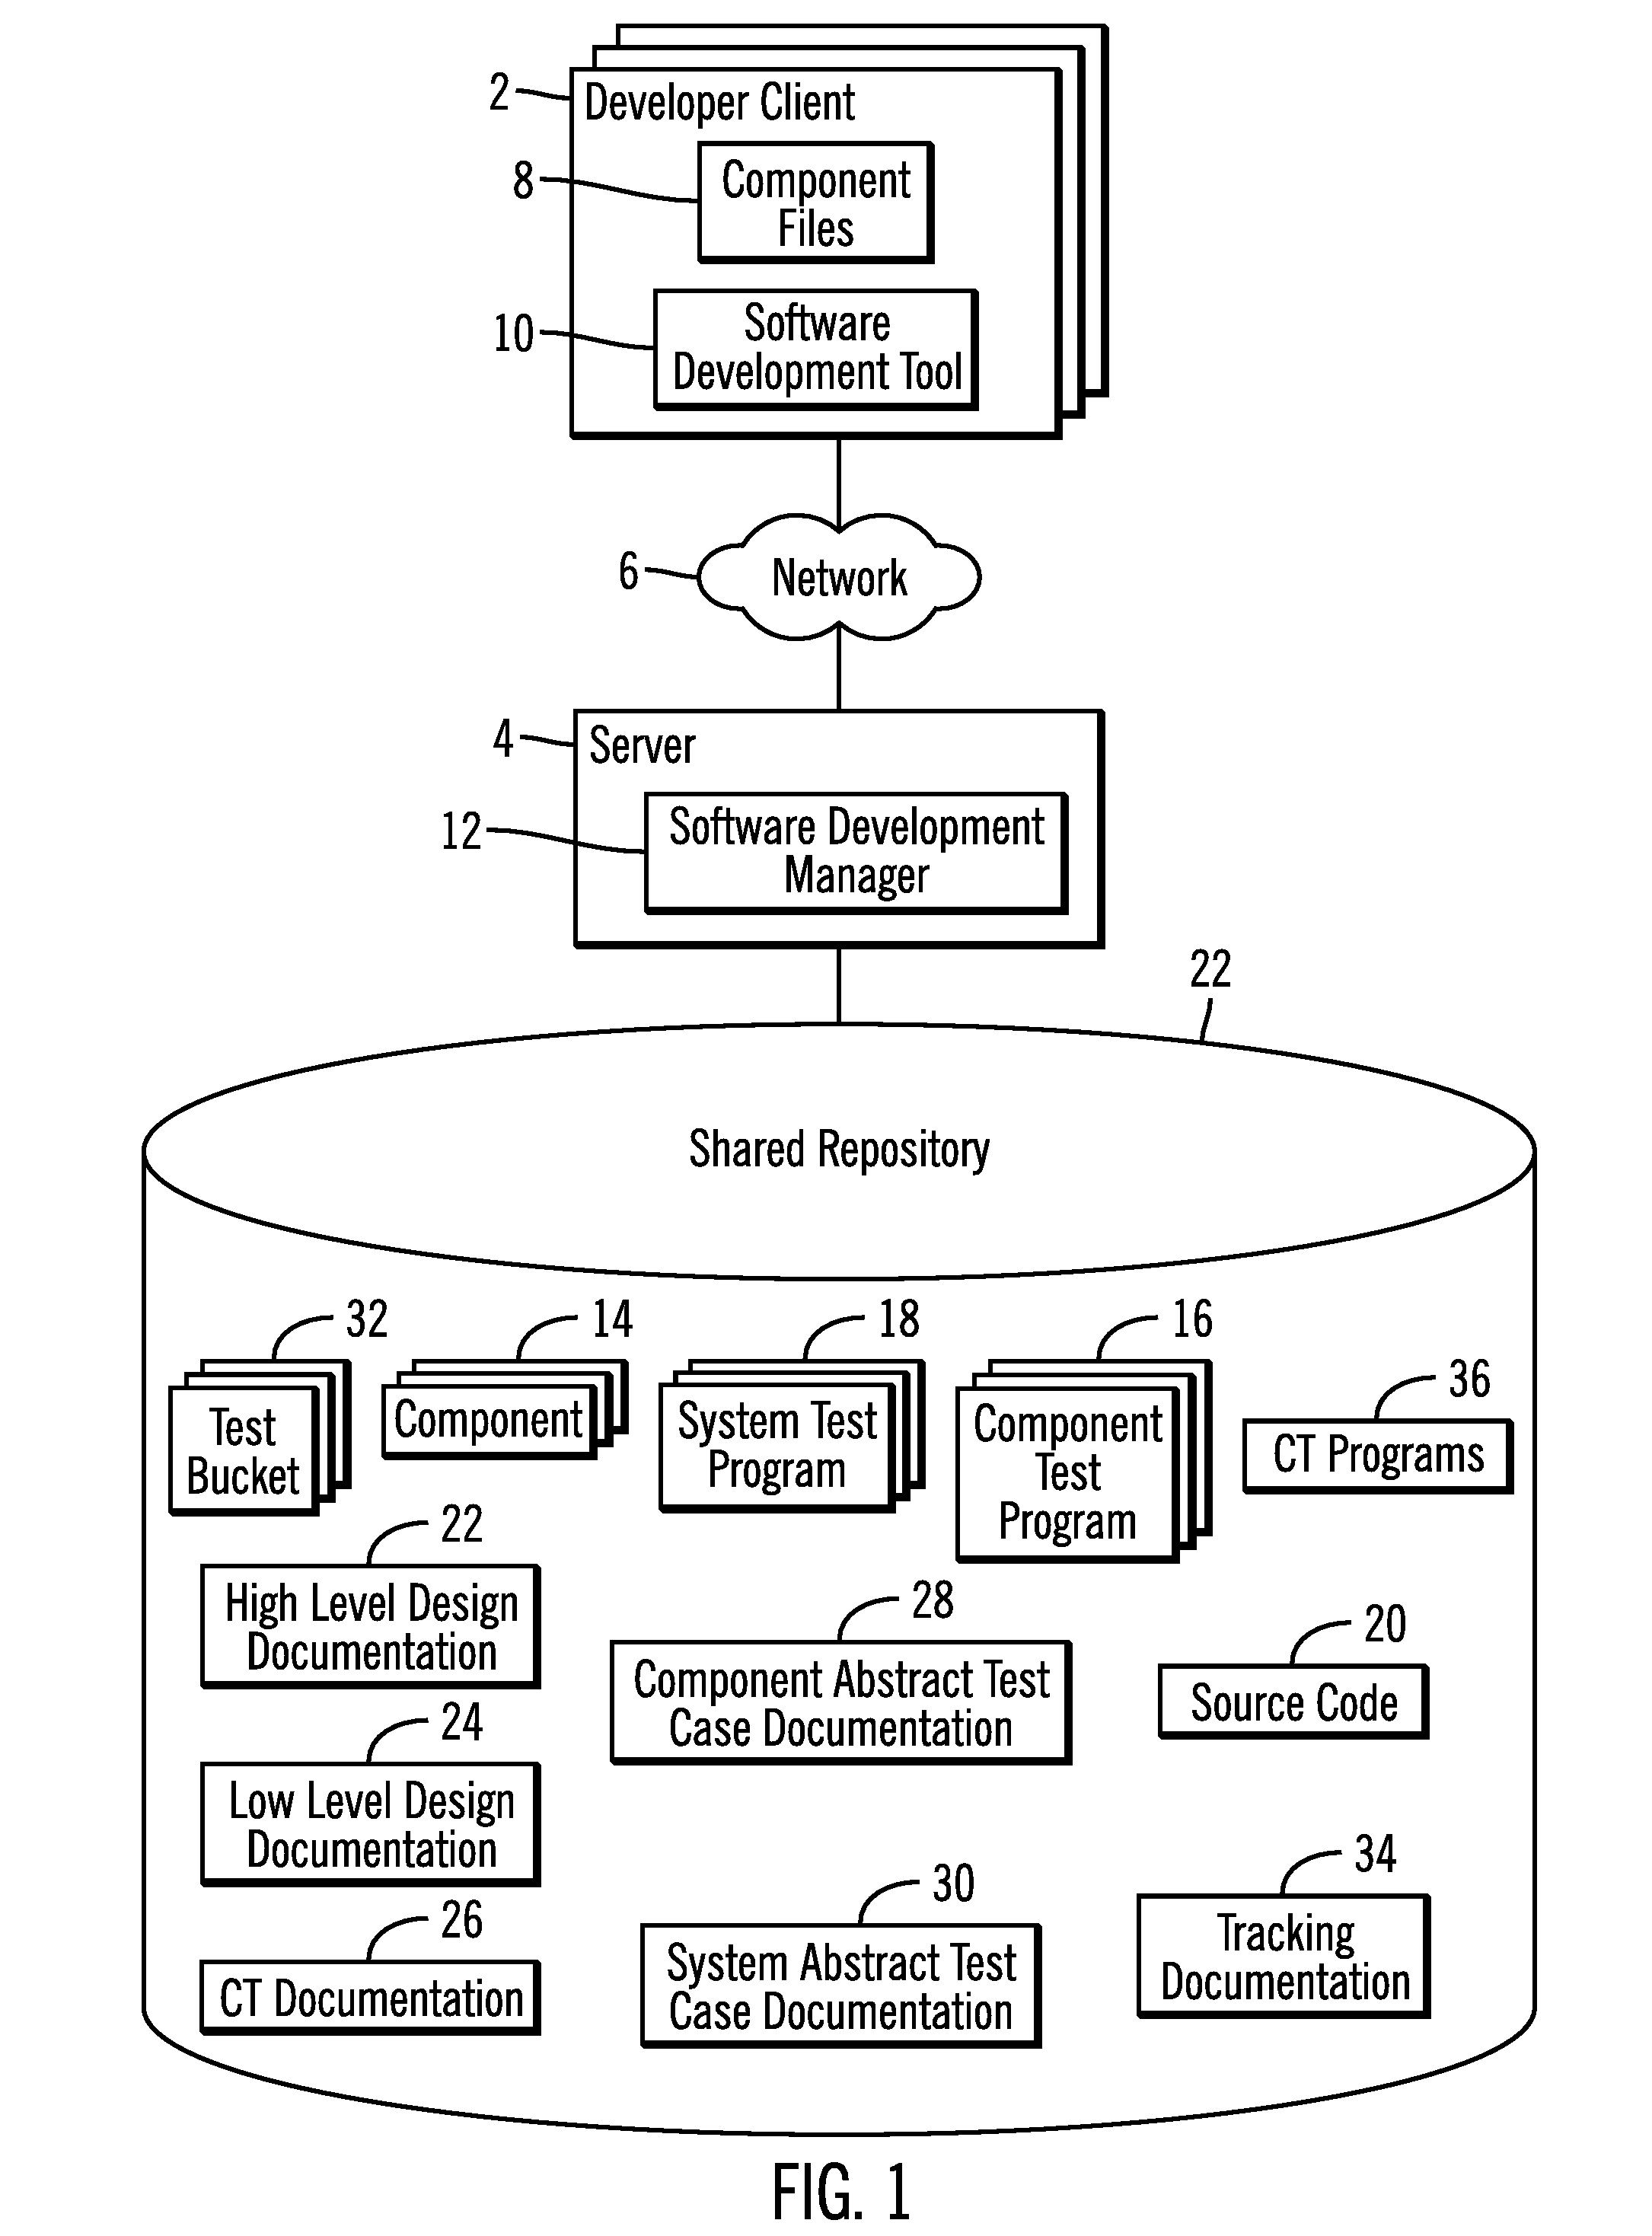 Developing software components and capability testing procedures for testing coded software component